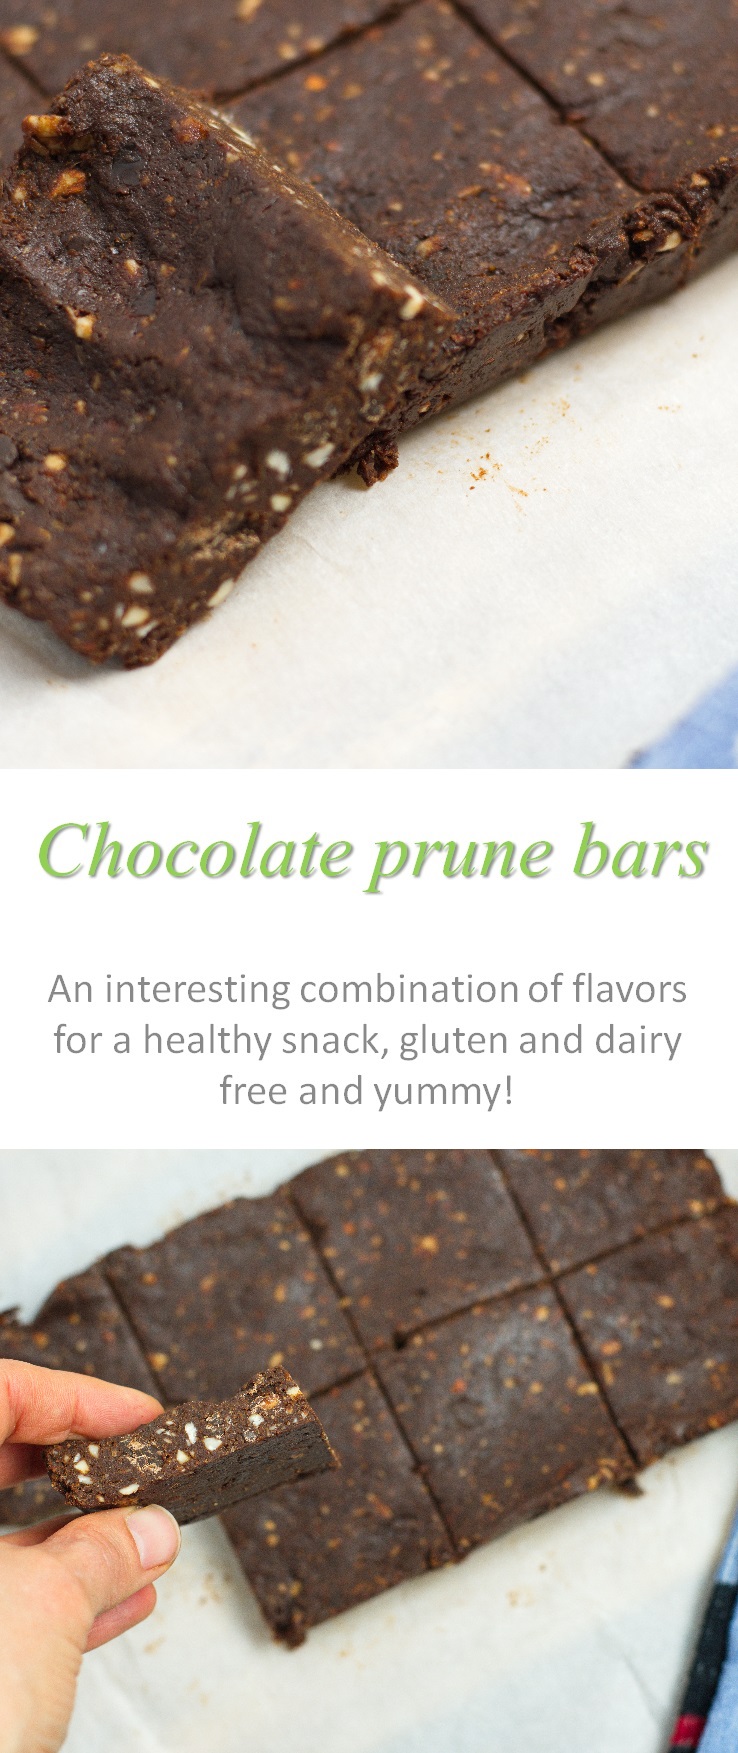 Chocolate prune bars with all healthy ingredients, using nuts and seeds for extra crunch and a rich chocolate taste.  #prunes